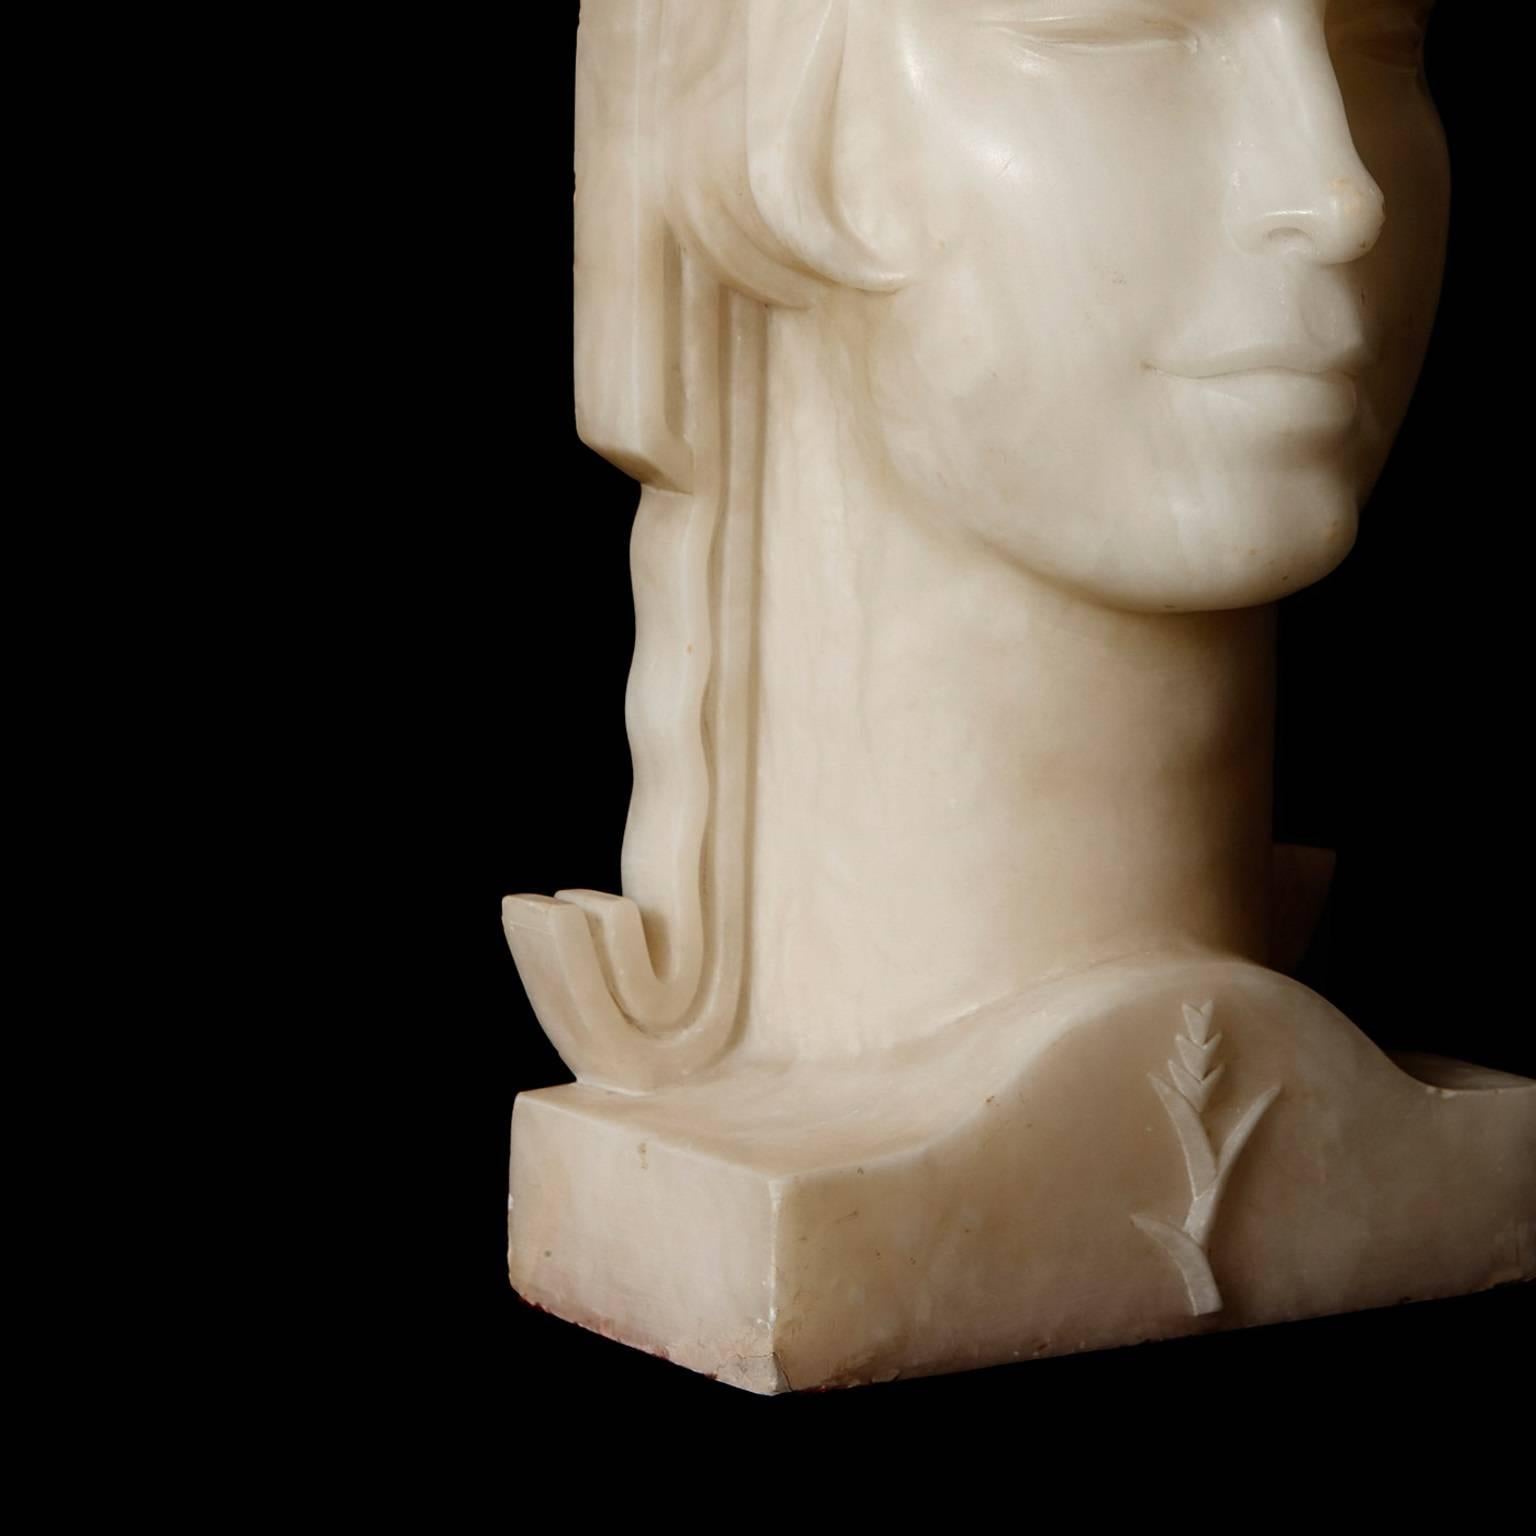 European Art Deco Style Continental Carved Alabaster Bust Depicting an Oriental Lady